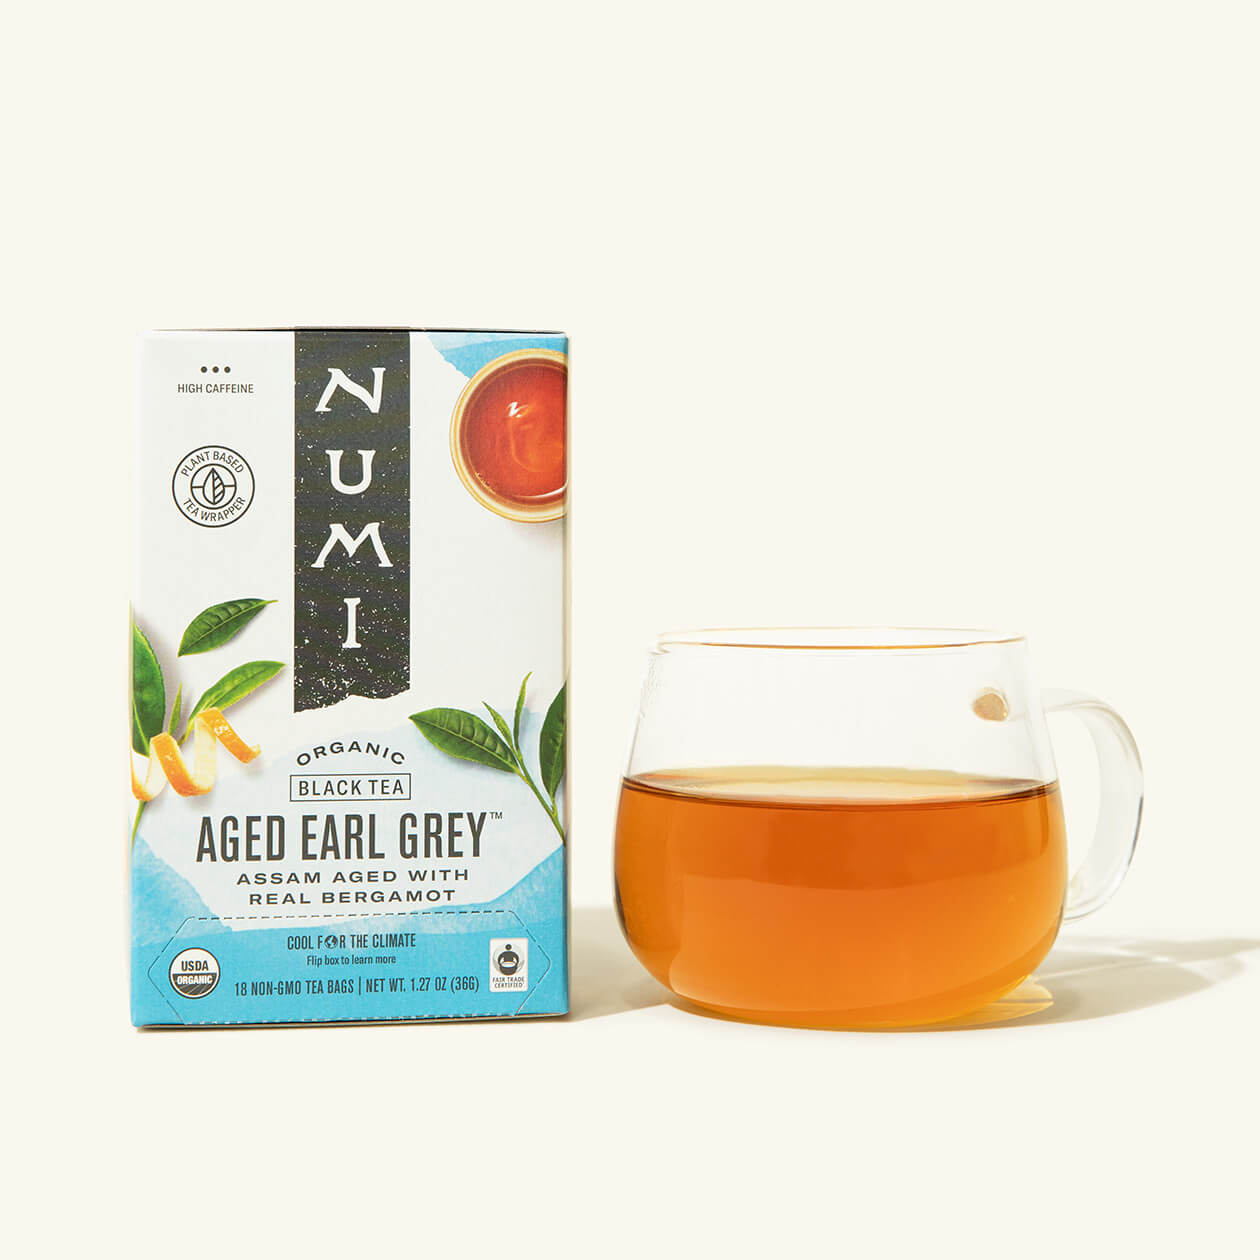 A box of Numi's Aged Earl Grey next to a brewed cup of tea in a clear cup